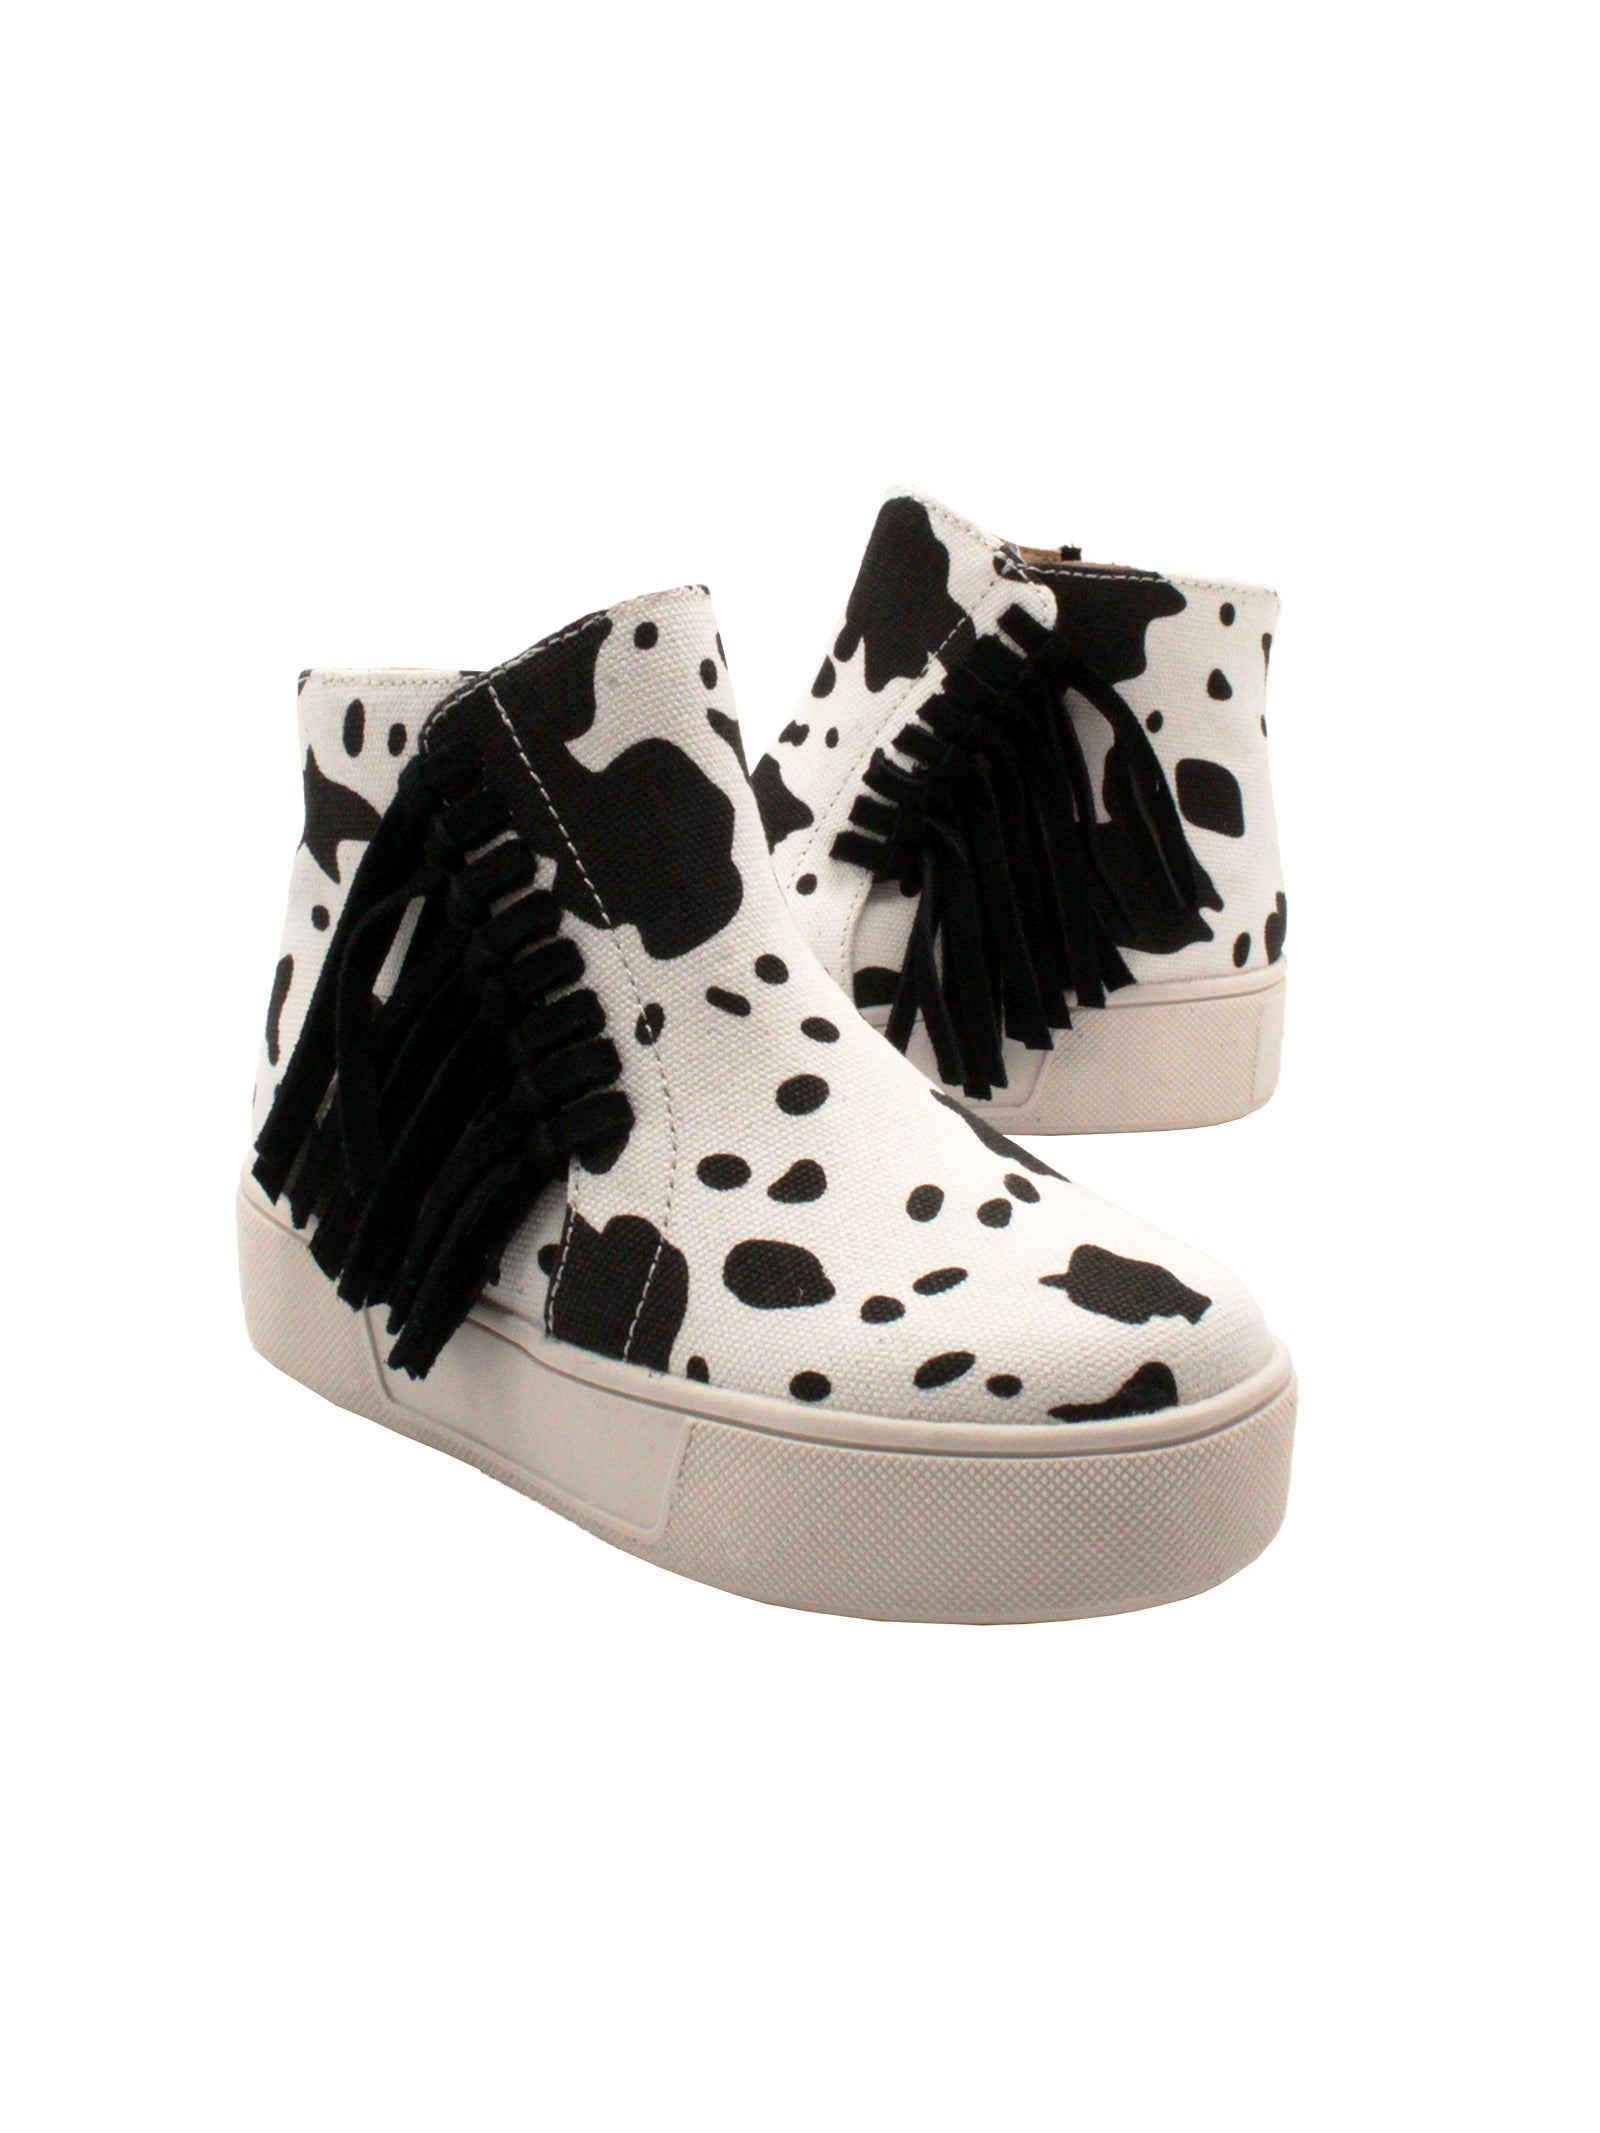 The ‘Lance’ fringed sneaker bootie by Volatile Kids is designed for little feet going to big places and is the comfiest way to take part in the Western trend. They have inside zippers to make them easy to slip on and off, while the textured rubber sneaker bottom provides traction and stability. These work equally well with skirts and pants alike. black white cow 2